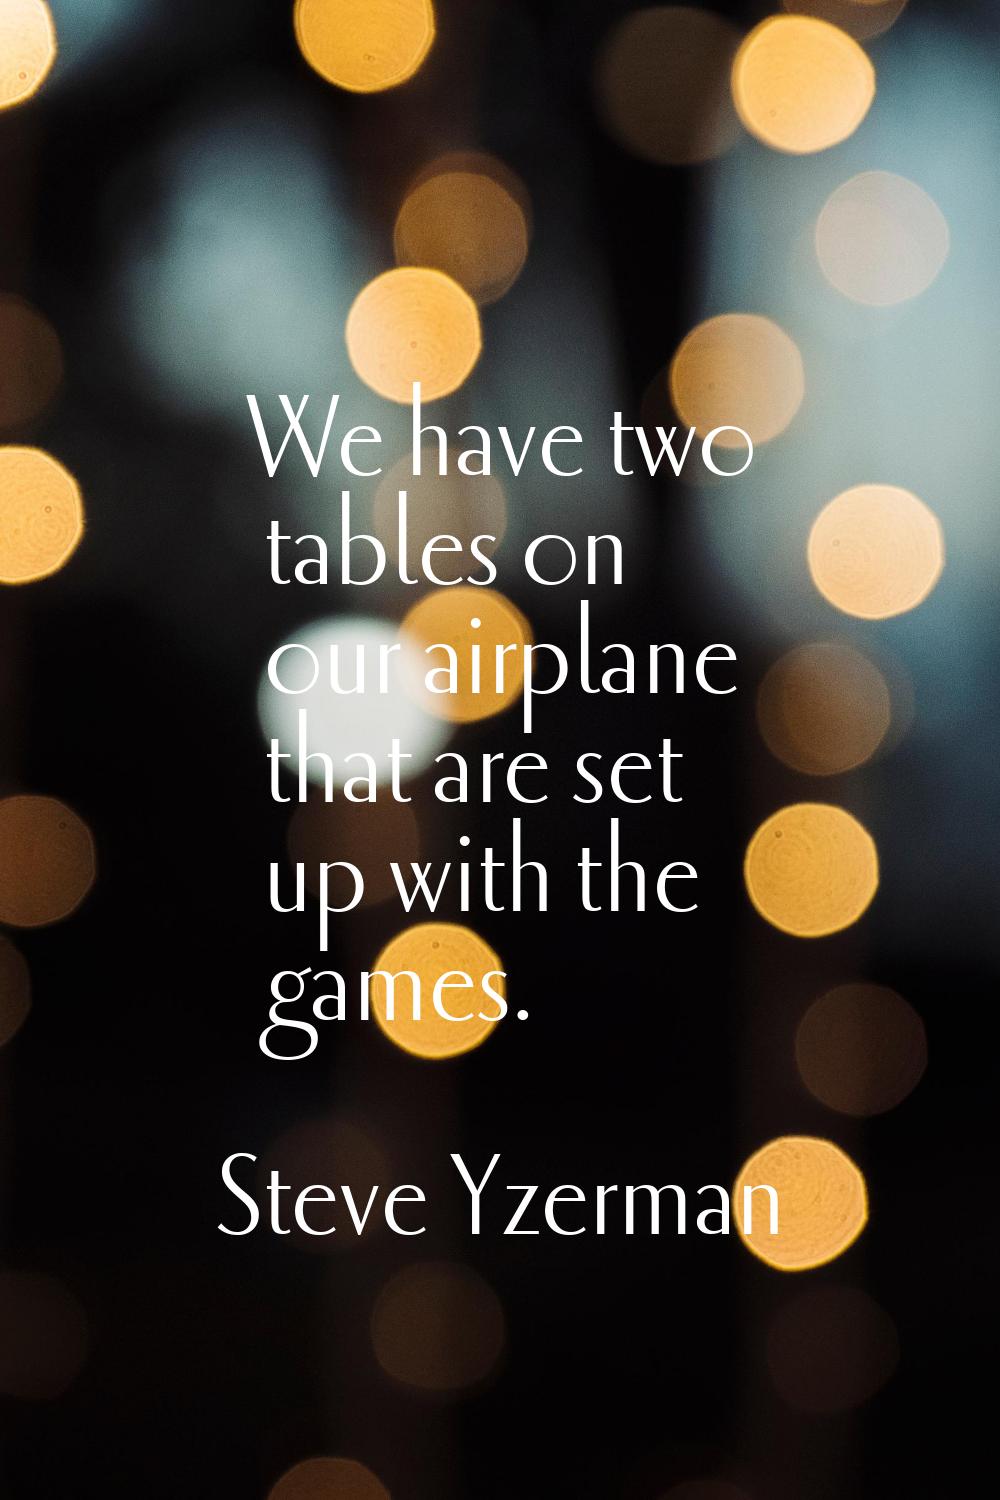 We have two tables on our airplane that are set up with the games.